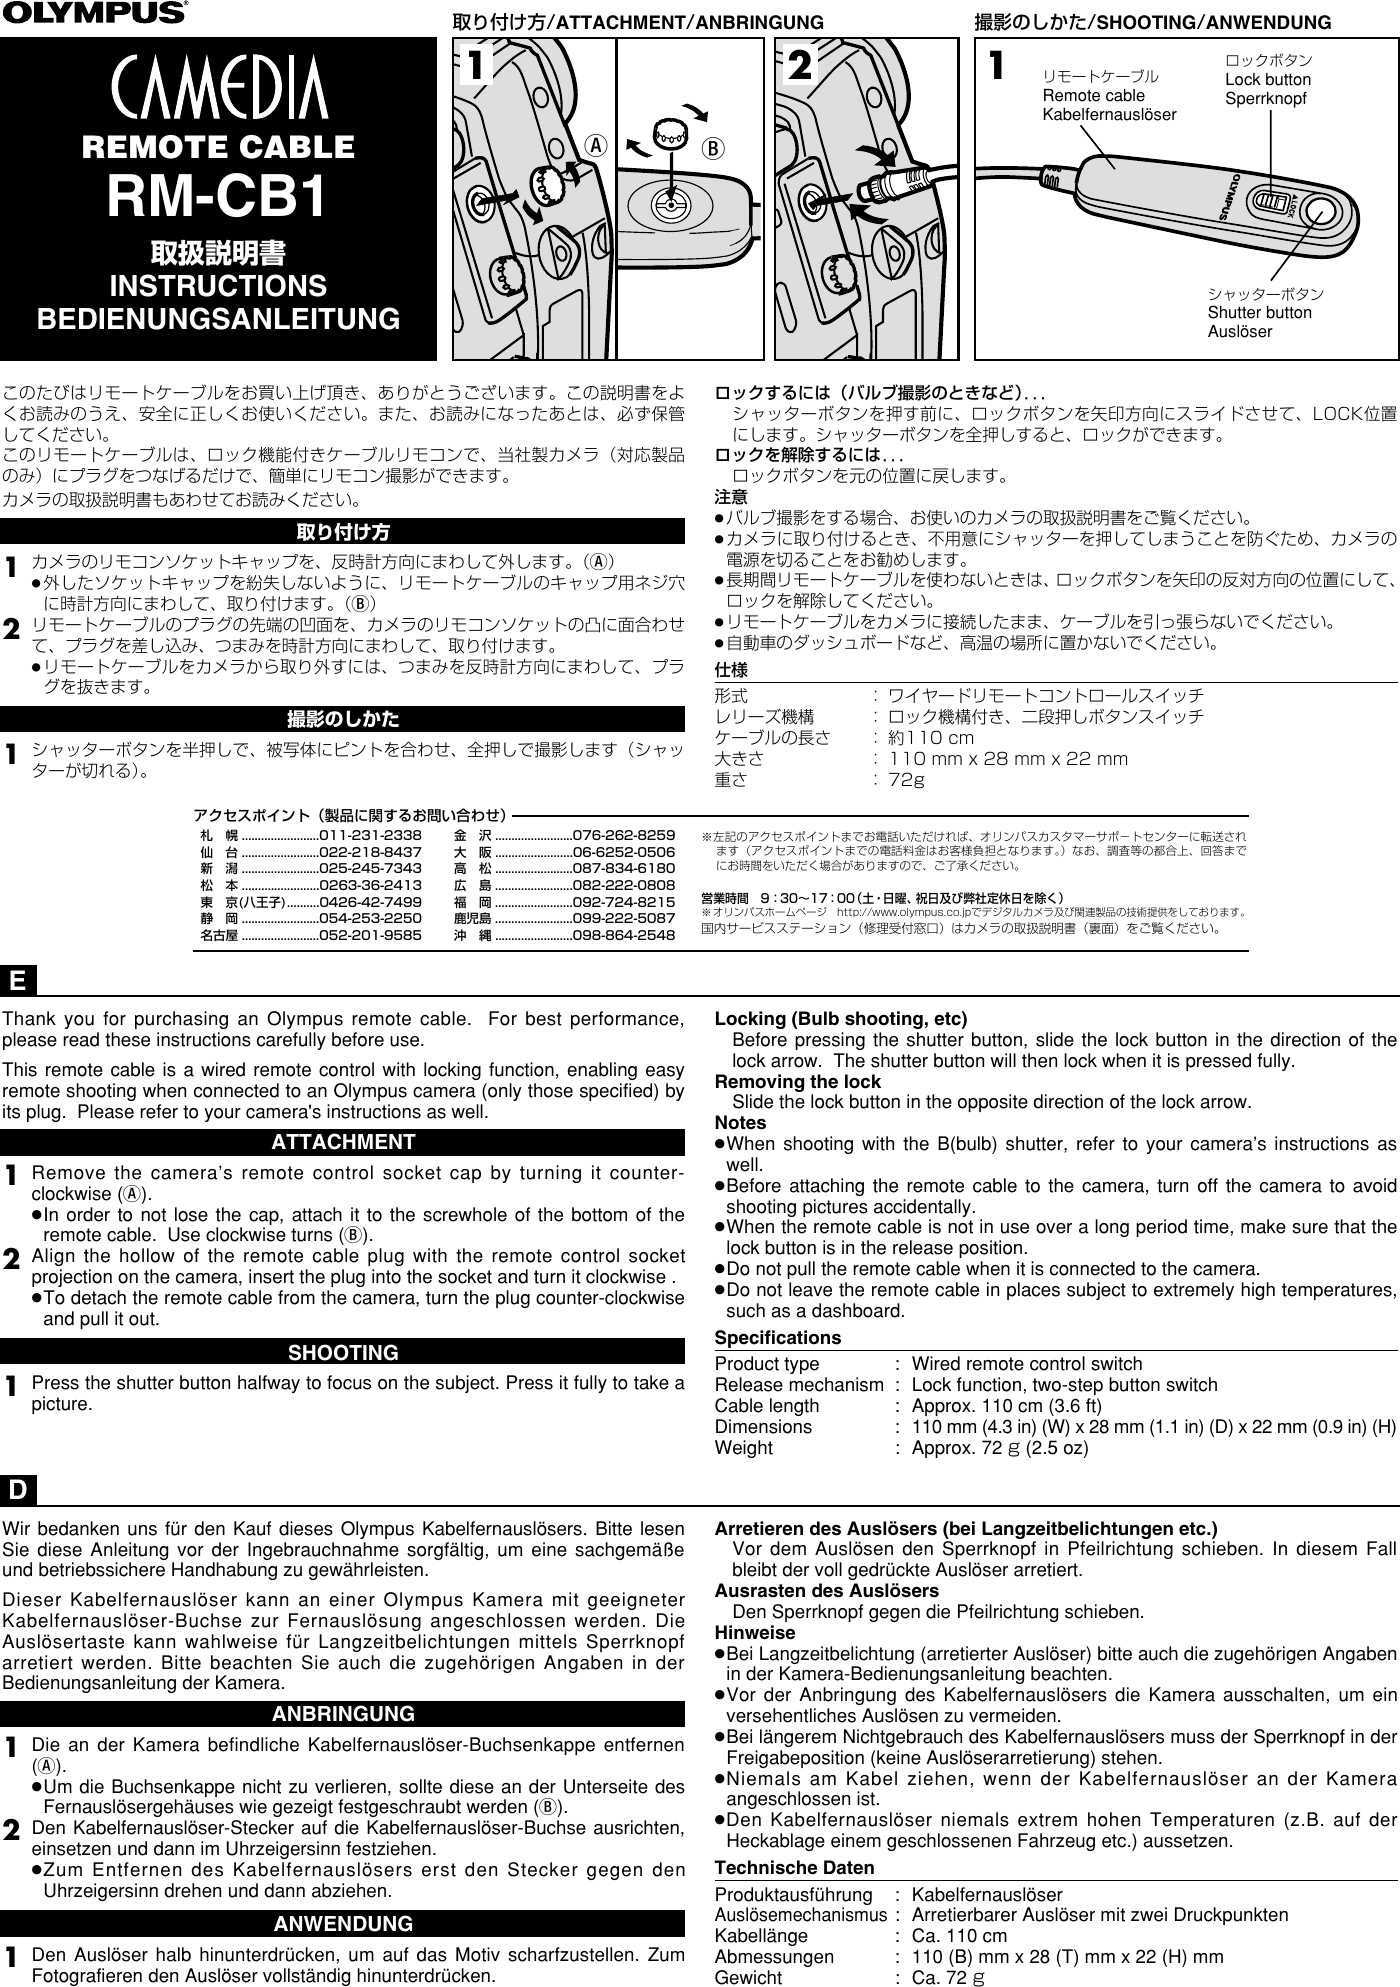 Page 1 of 2 - Olympus Rm-Cb1-Instruction-Manual